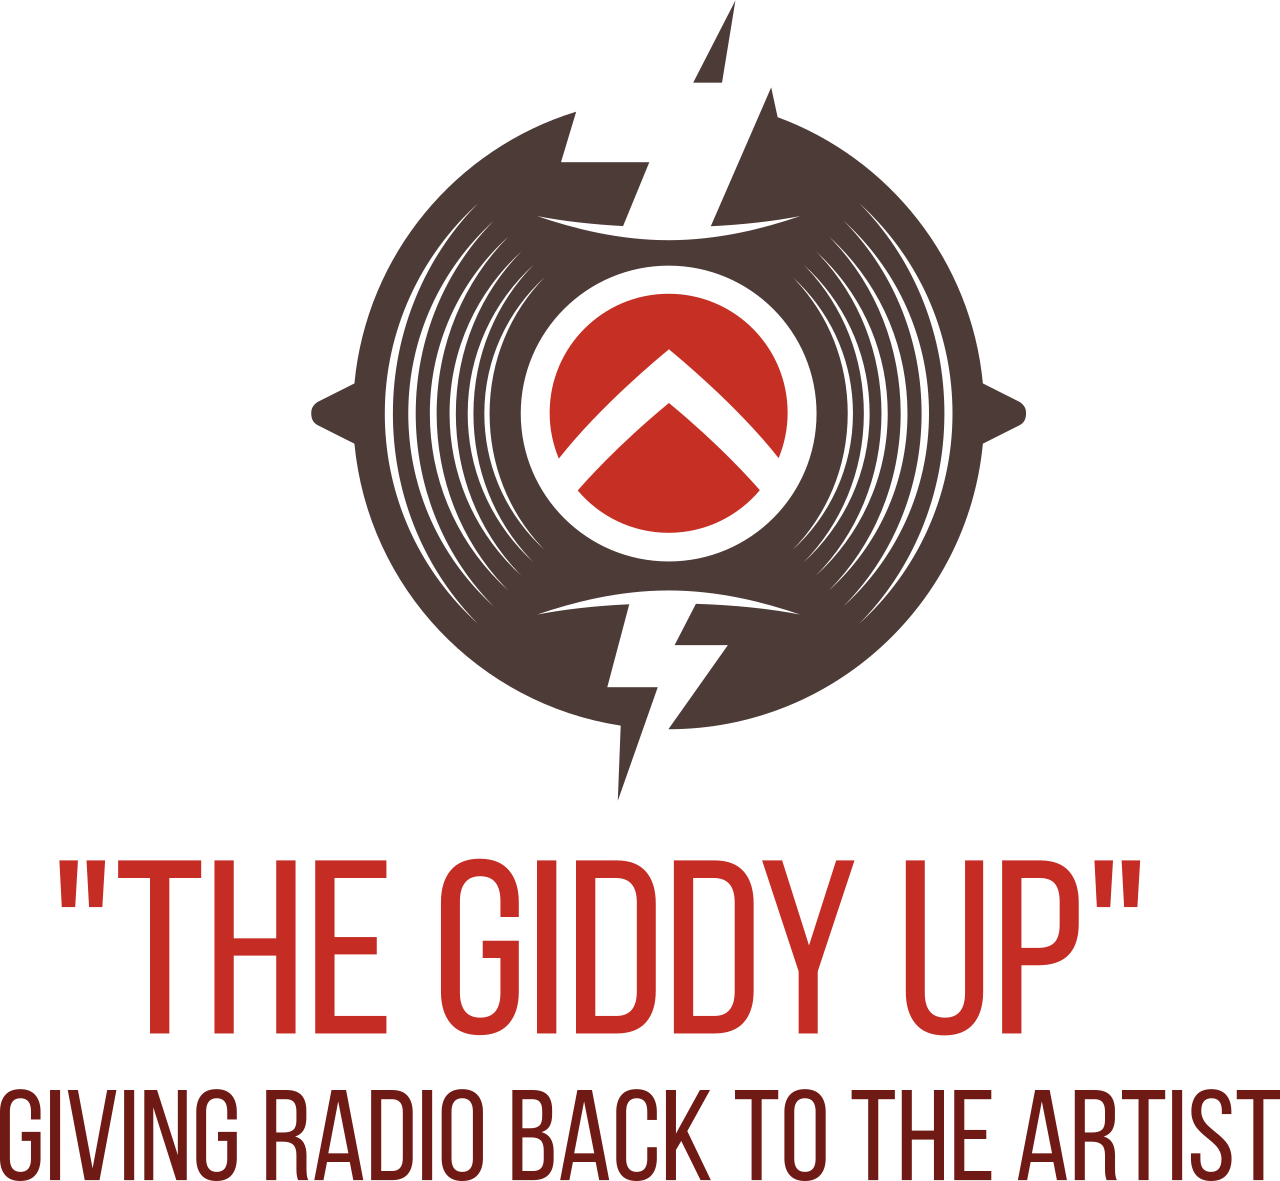 The GIDDY UP 's web page